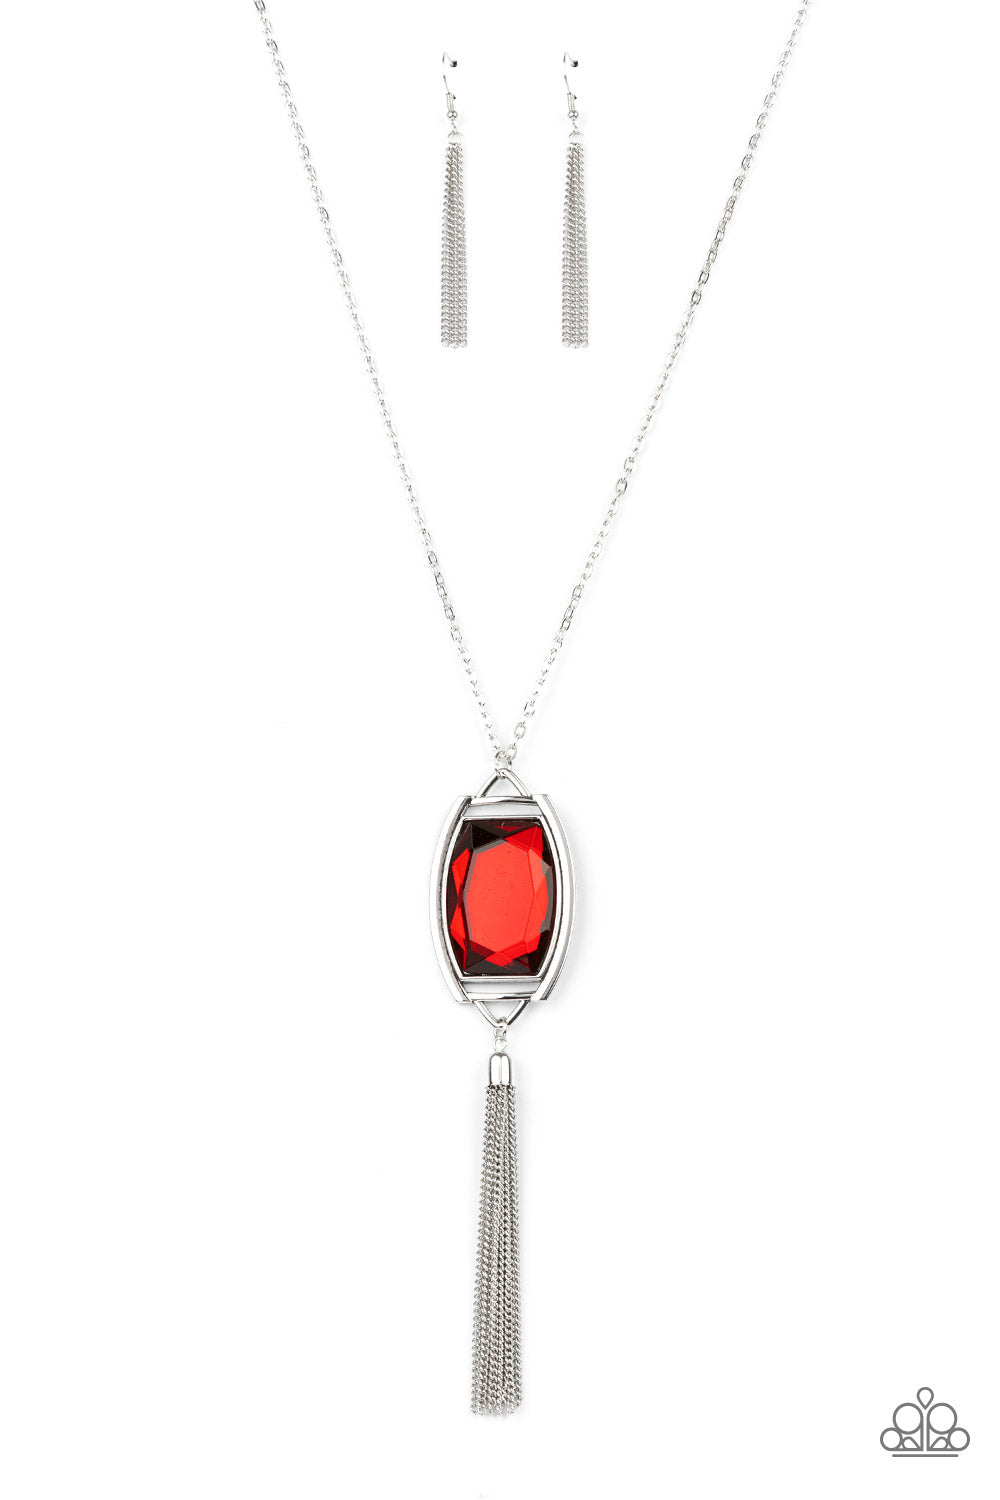 Gem Stone King 925 Sterling Silver Red Created Ruby and White Topaz Pendant  Necklace For Women (20.03 Cttw, Emerald Cut 18X13MM, with 18 inch Silver  Chain) - Walmart.com